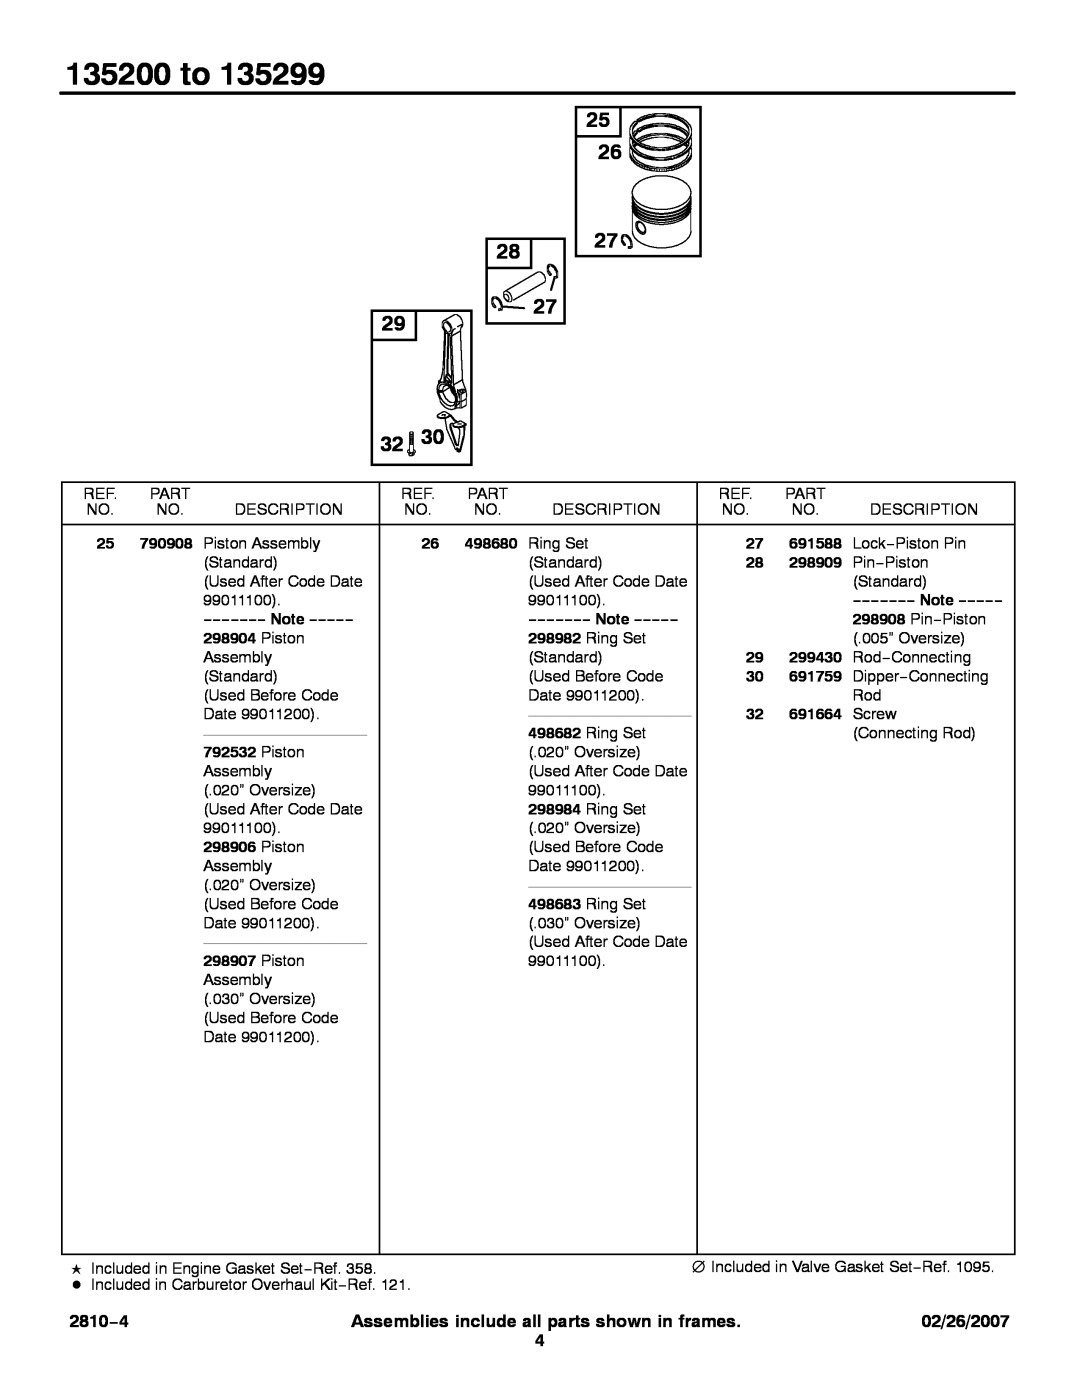 Briggs & Stratton service manual 135200 to, 2810−4, Assemblies include all parts shown in frames, 02/26/2007 